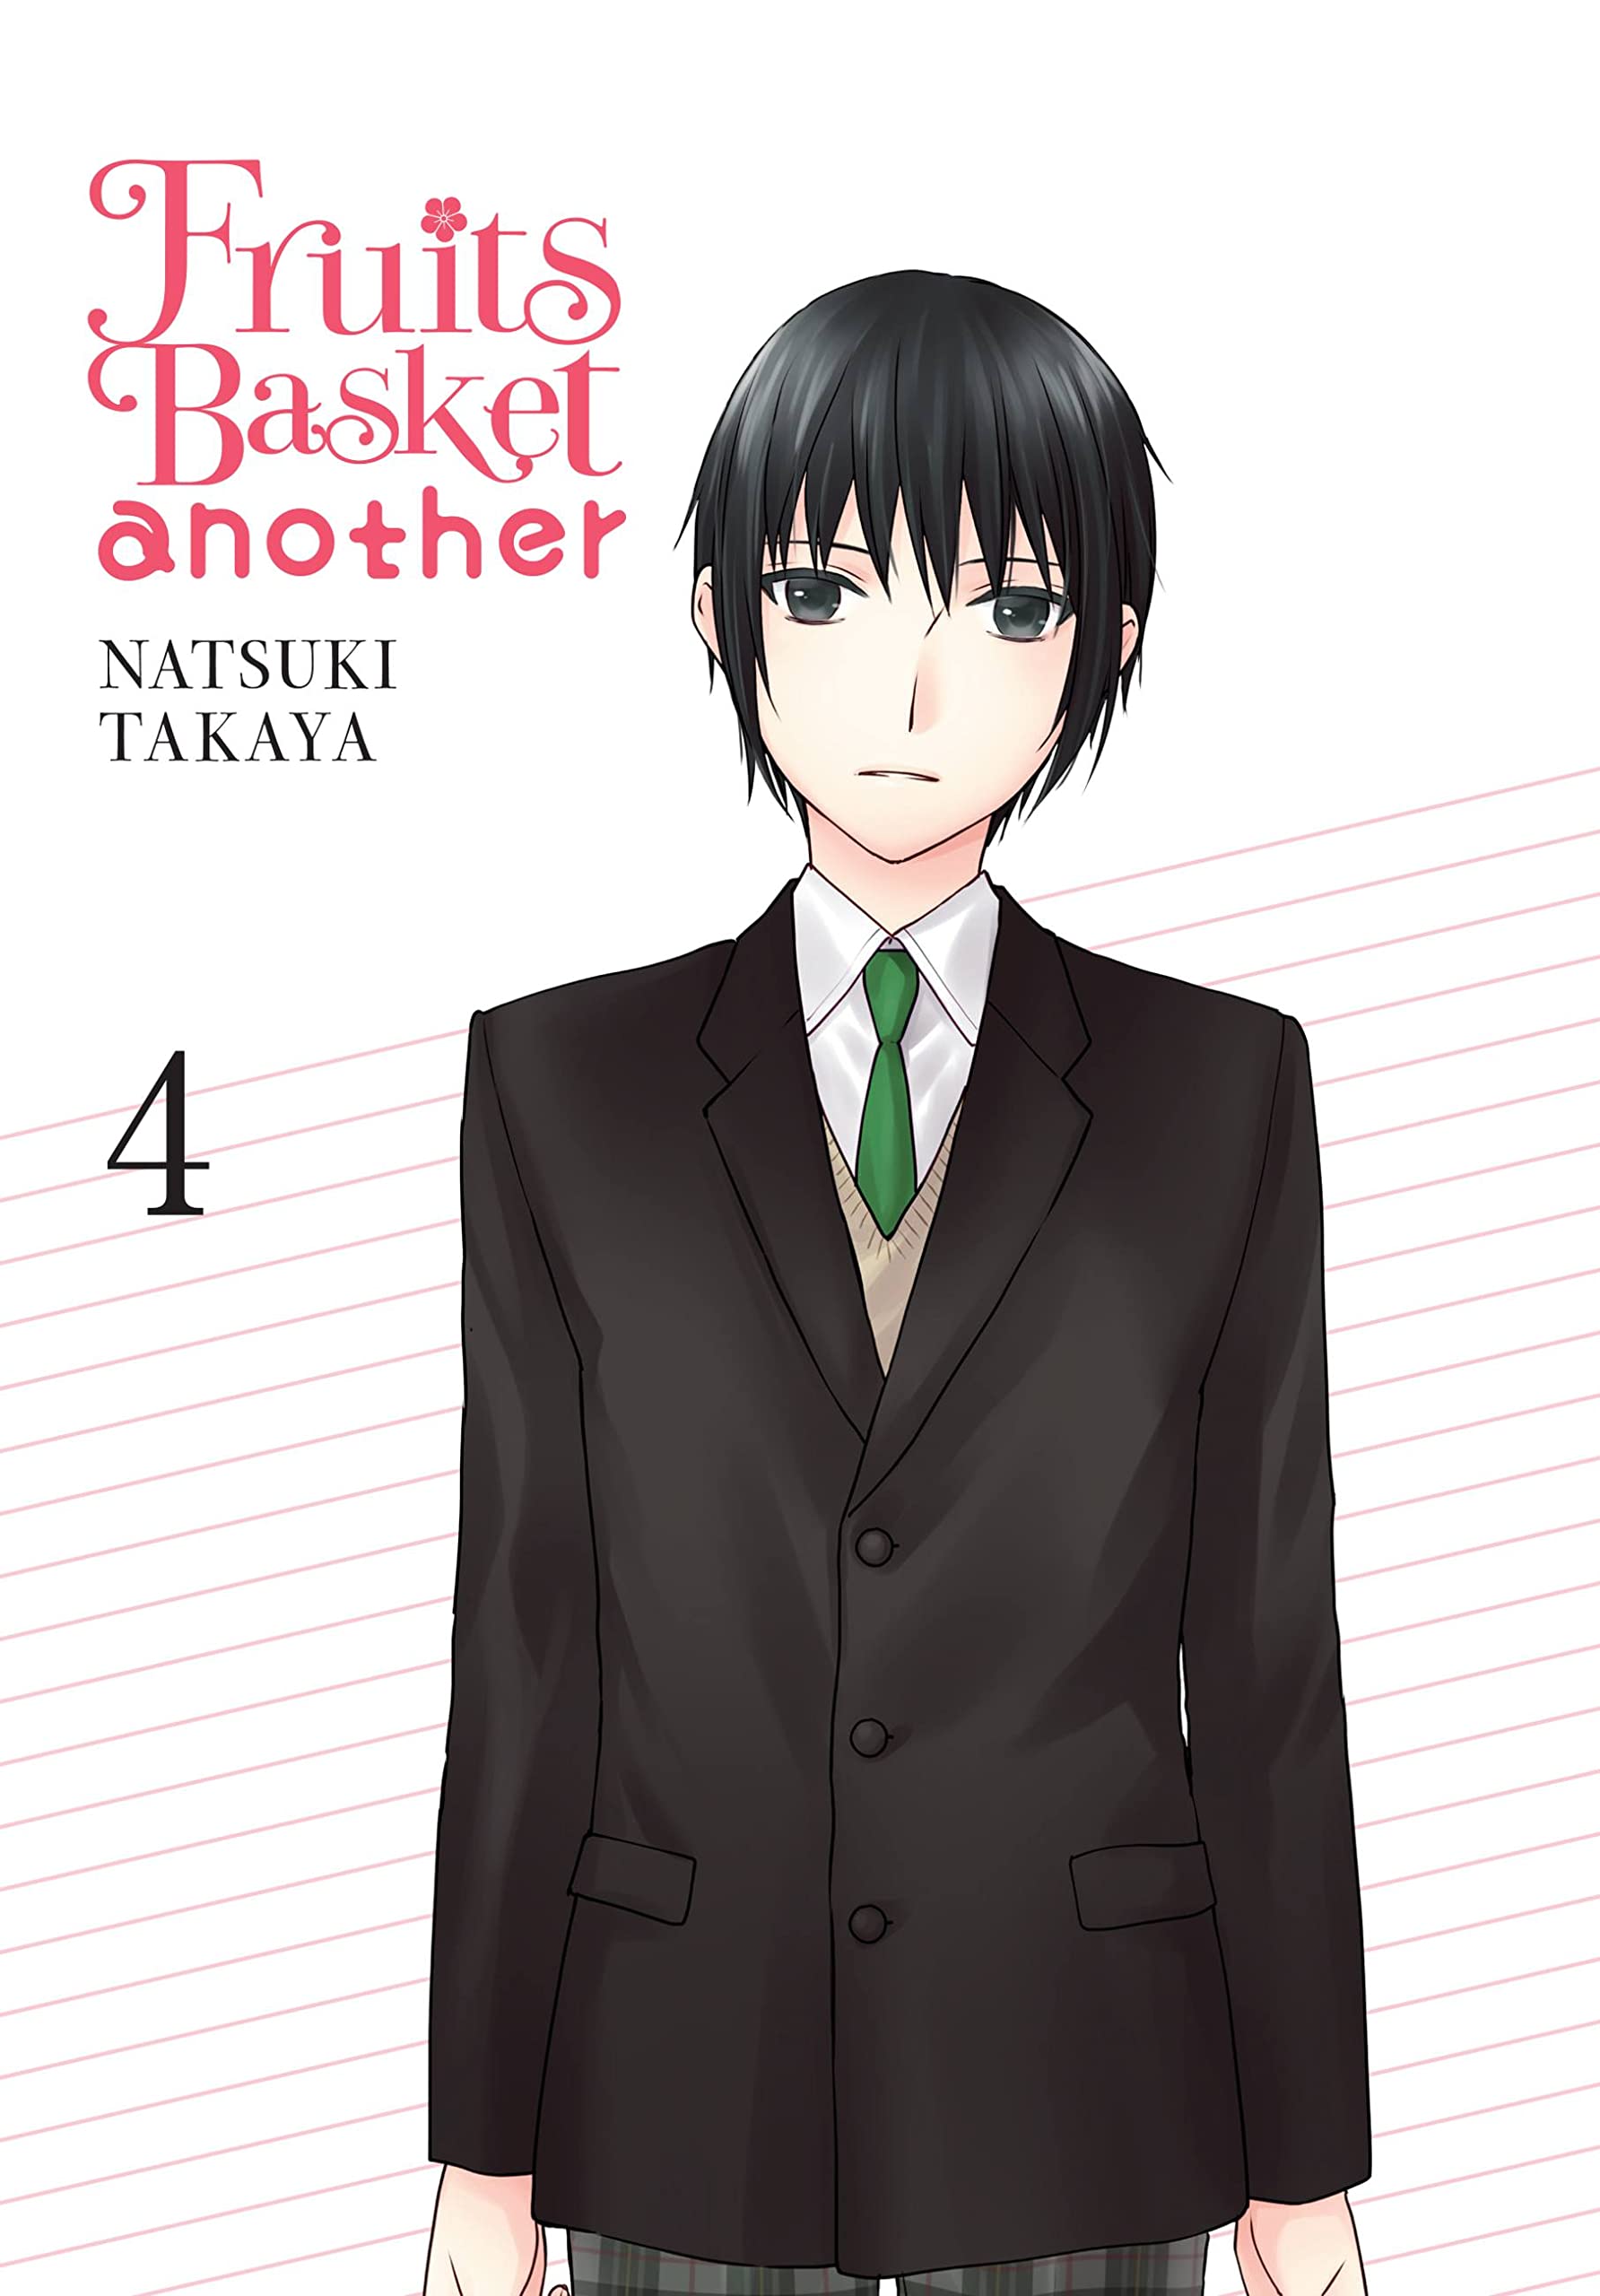 Fruits Basket Another Vol. 04